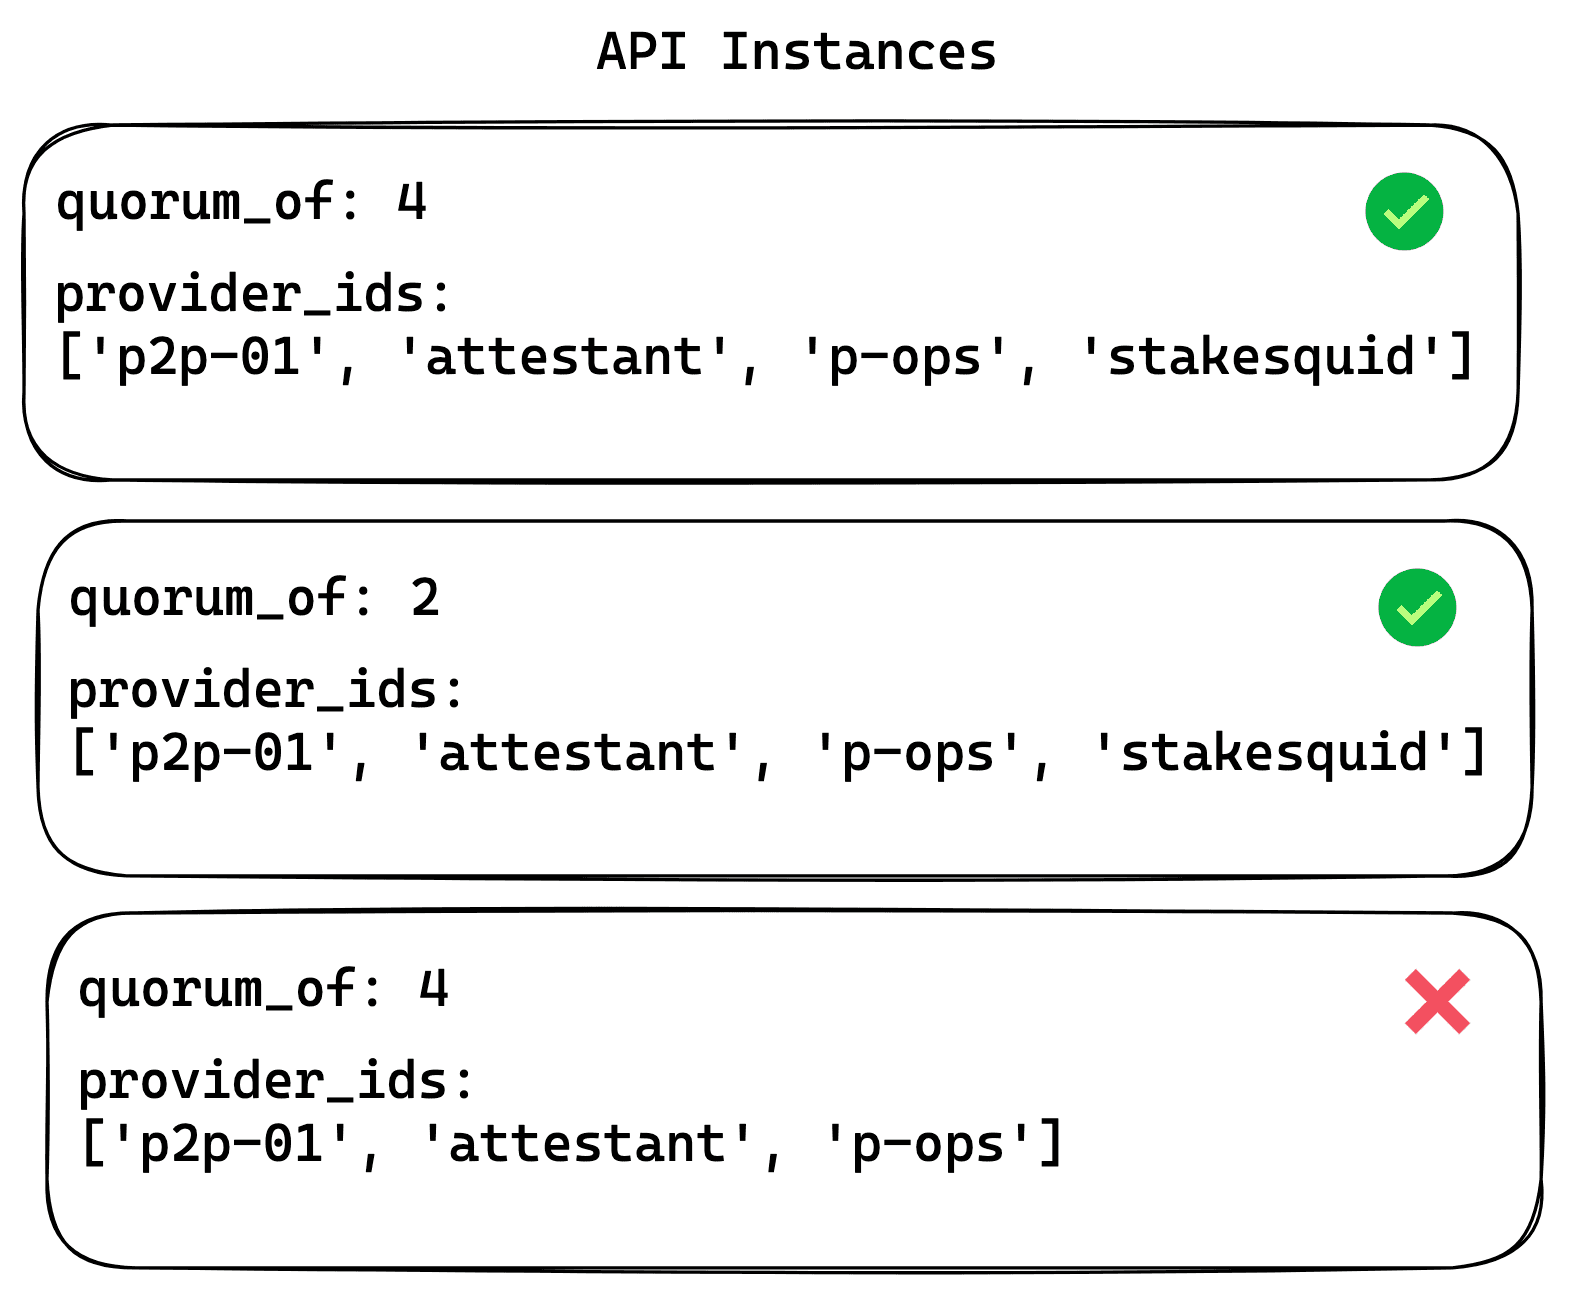 DRPC quorum config examples with provider_ids